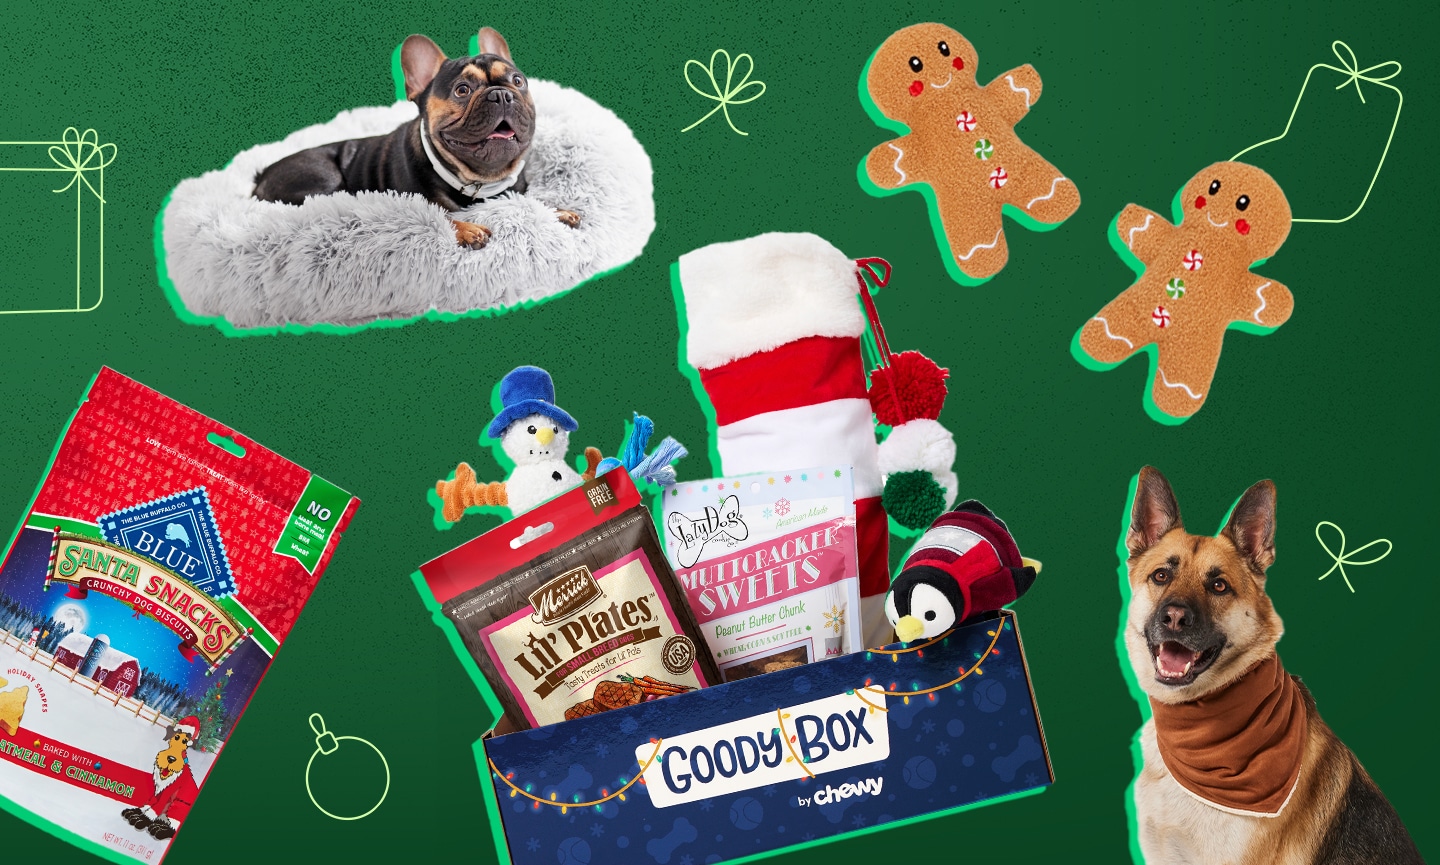 https://media-be.chewy.com/wp-content/uploads/2022/10/22160421/holiday-pet-gifts-editors-picks-hero.jpg